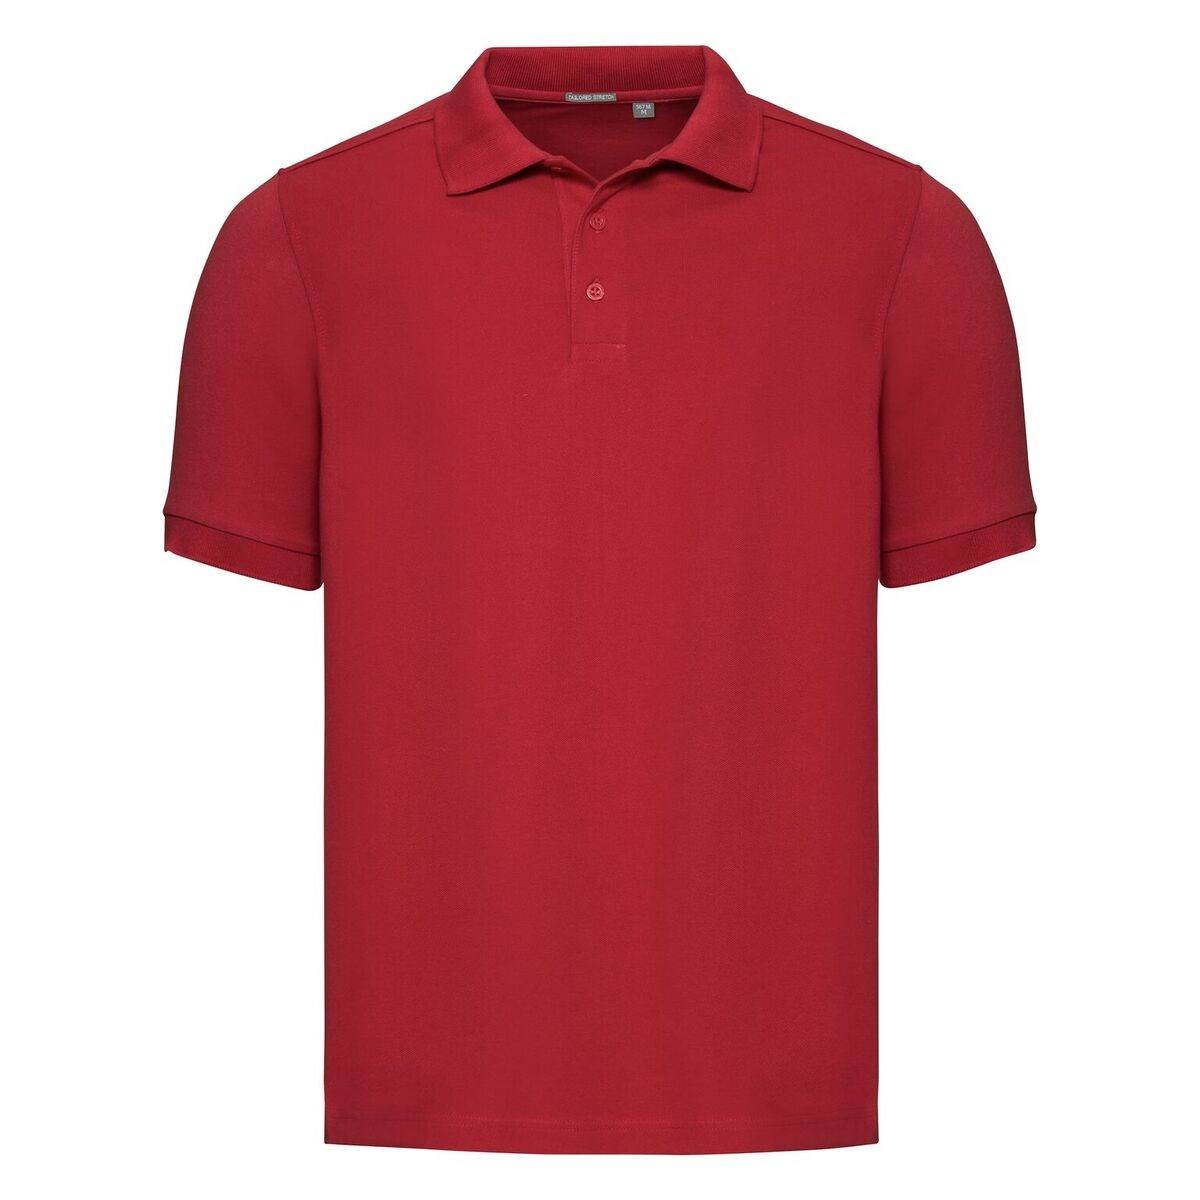 Tailored Russell Men's Stretch Polo Shirt